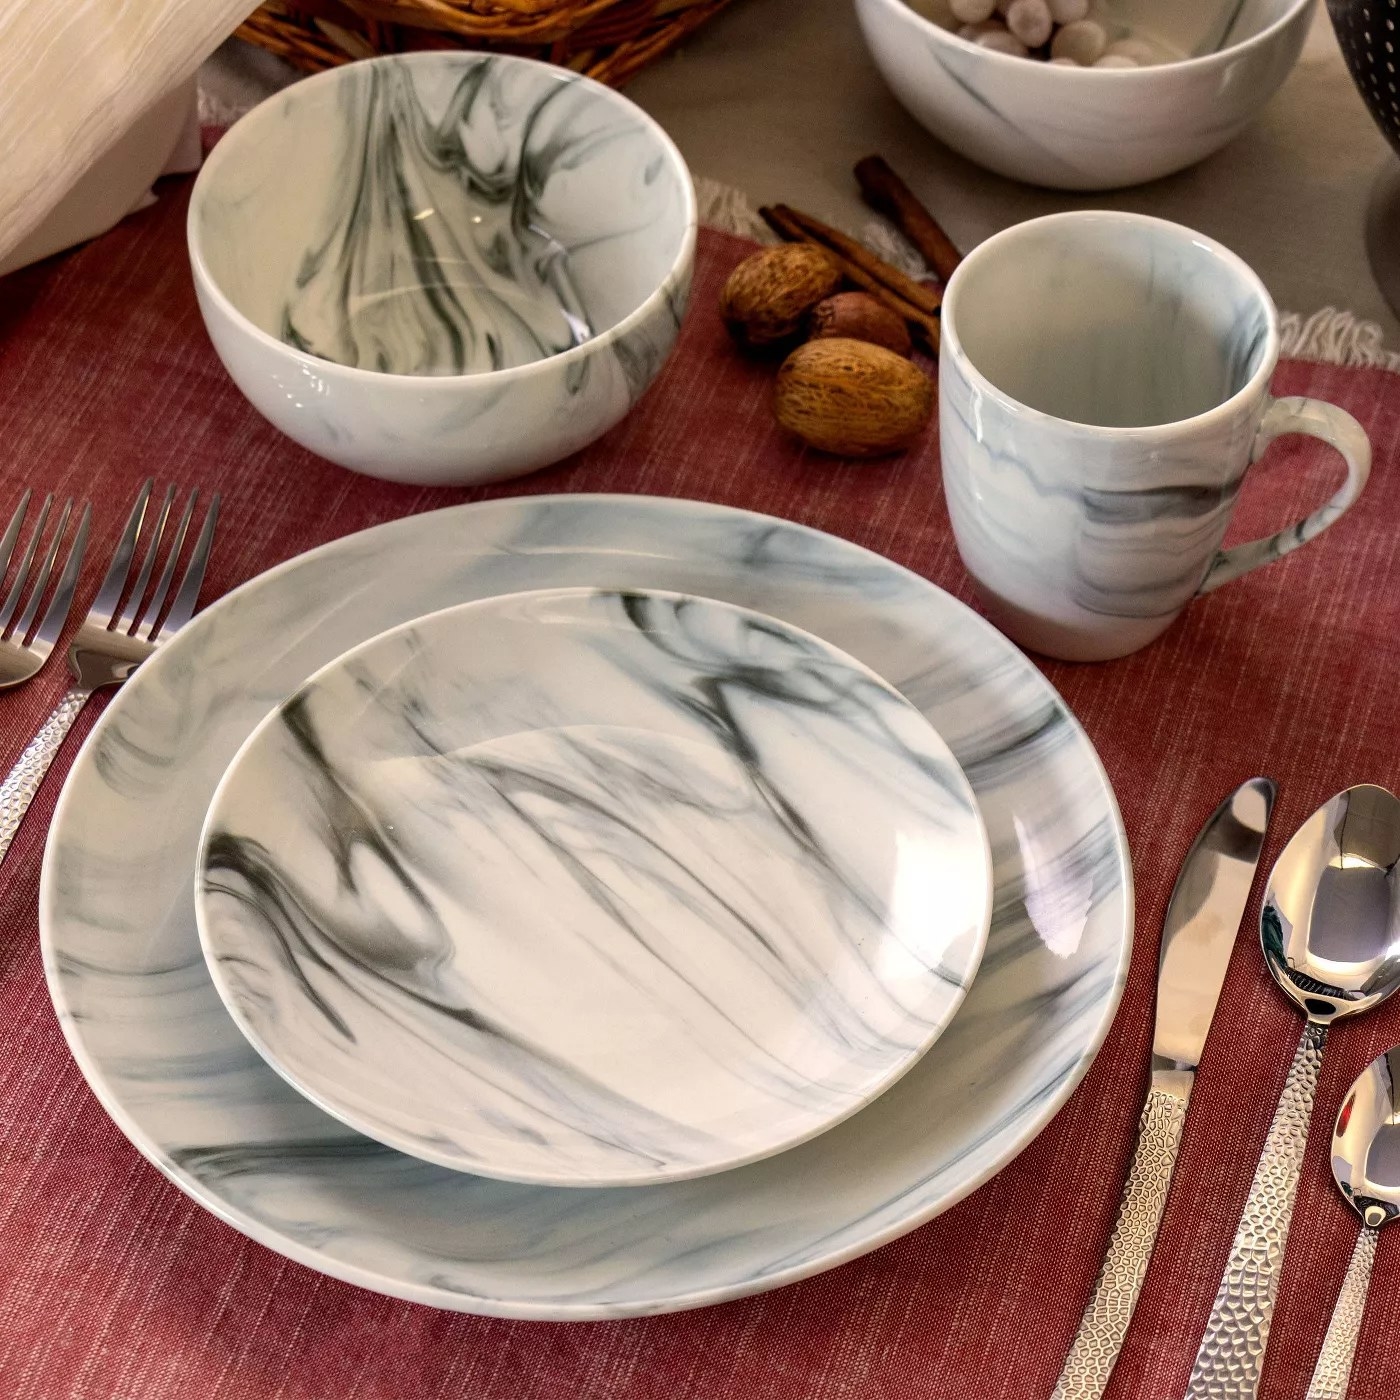 A place setting using the marble dishes on a dining table